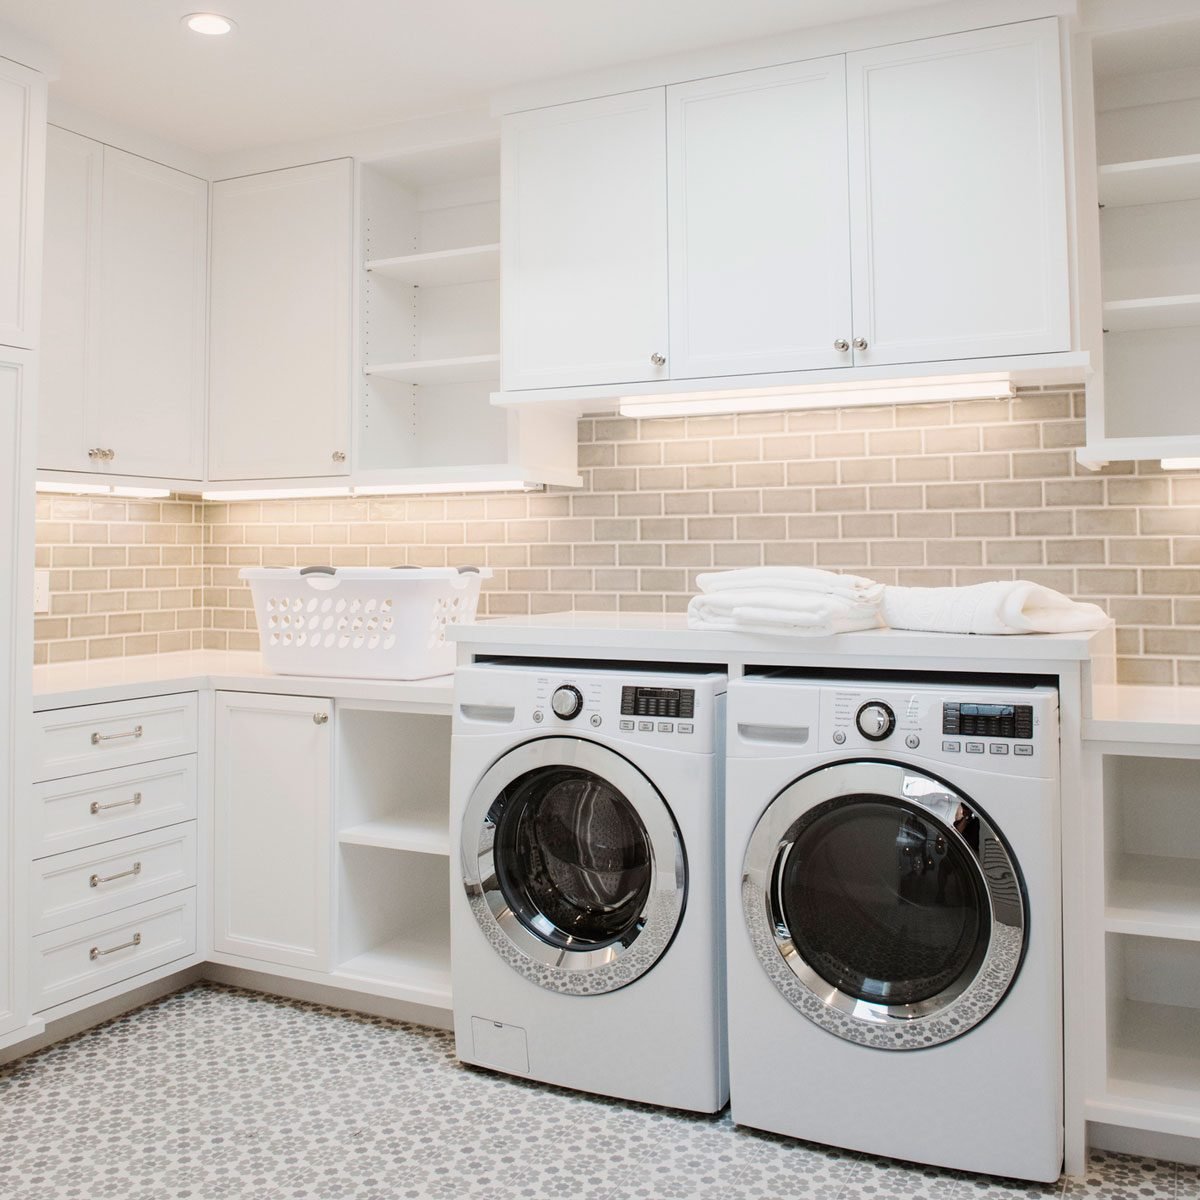 25 Laundry Room Ideas You Can Diy, Diy Laundry Room Cabinets Plans